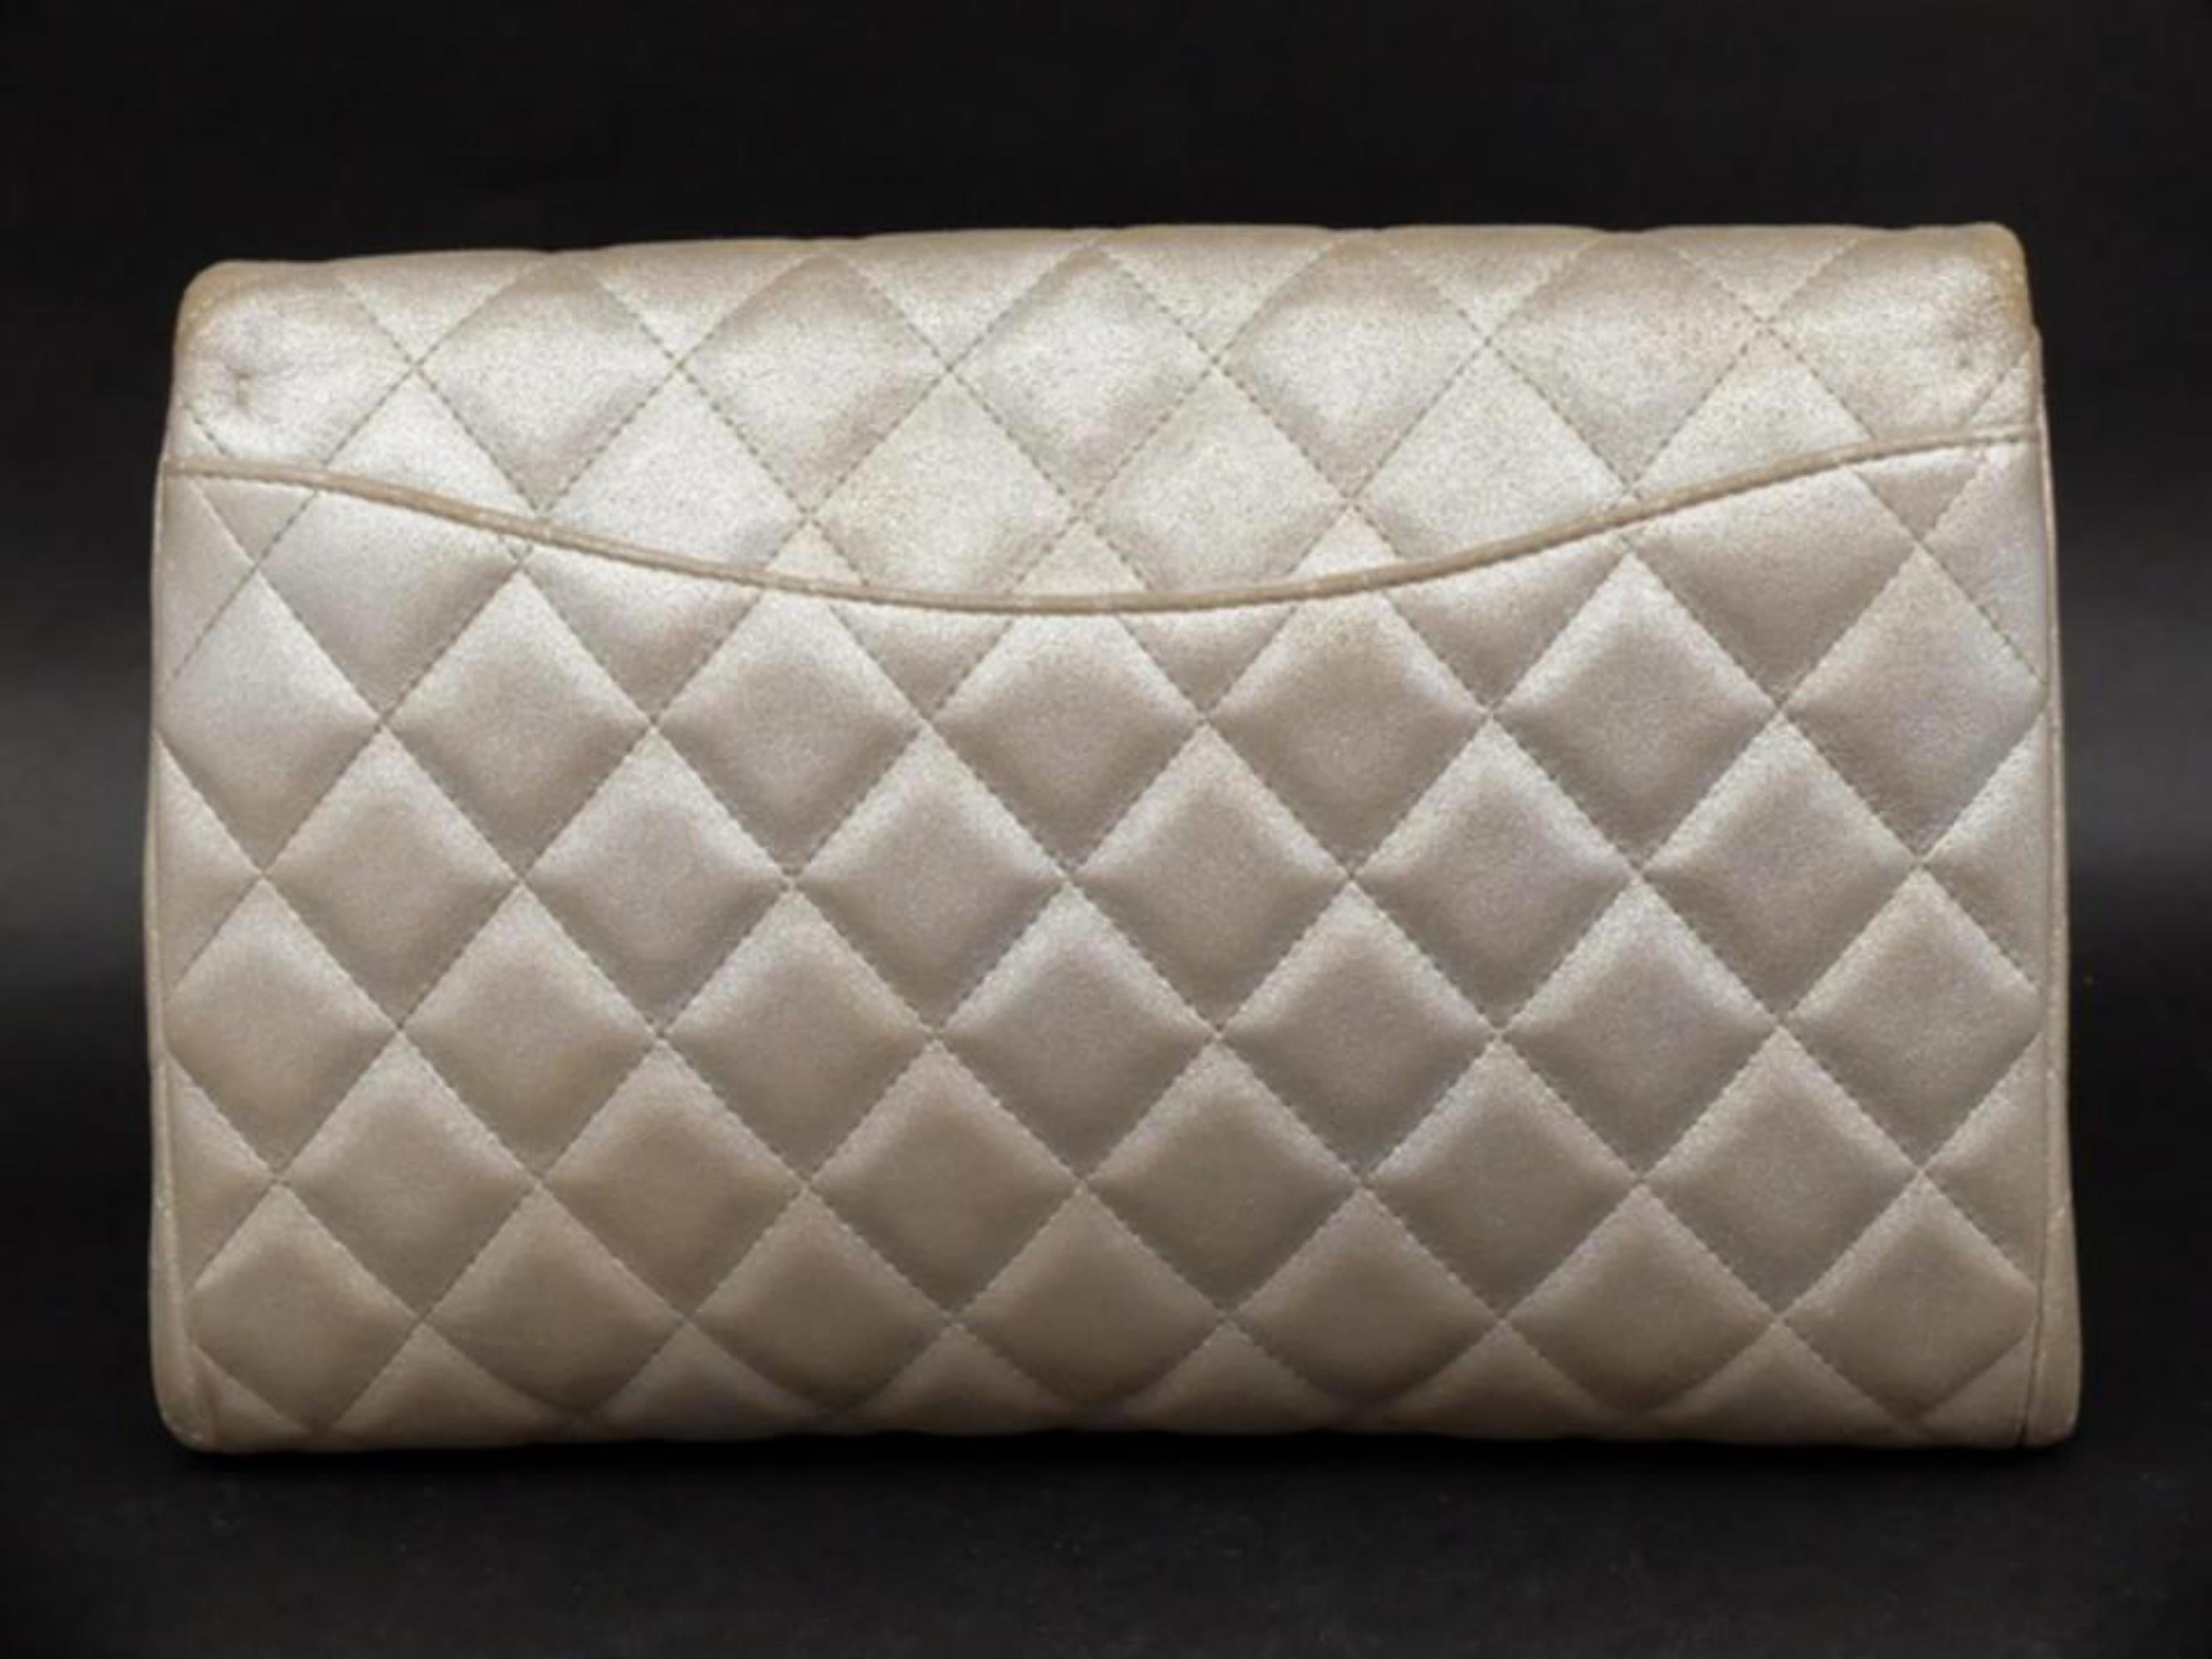 Chanel Clutch Classic Flap Quilted Jumbo Chain 231197 Silver Leather Shoulder Ba For Sale 3